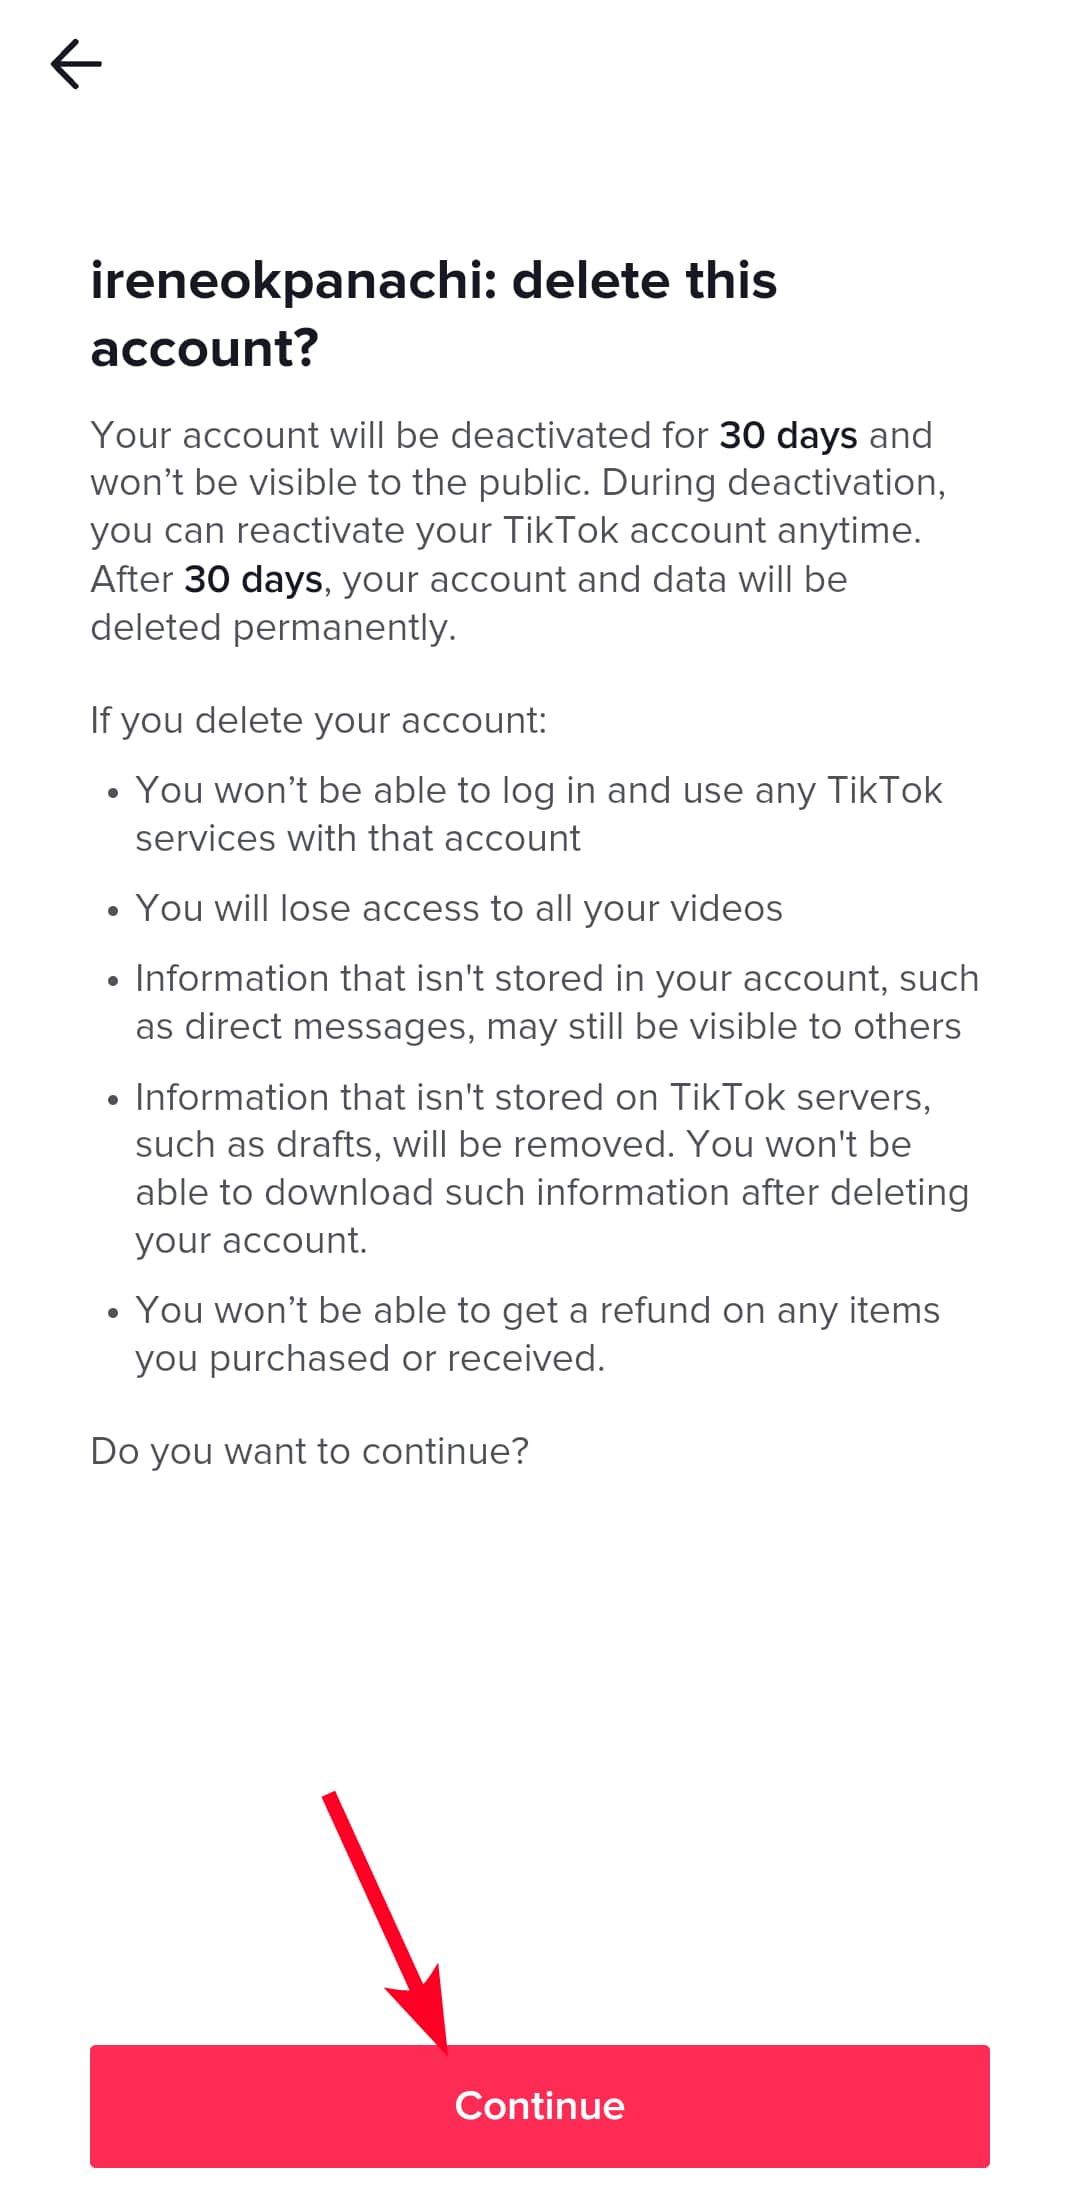 Consequences of deleting your TikTok account